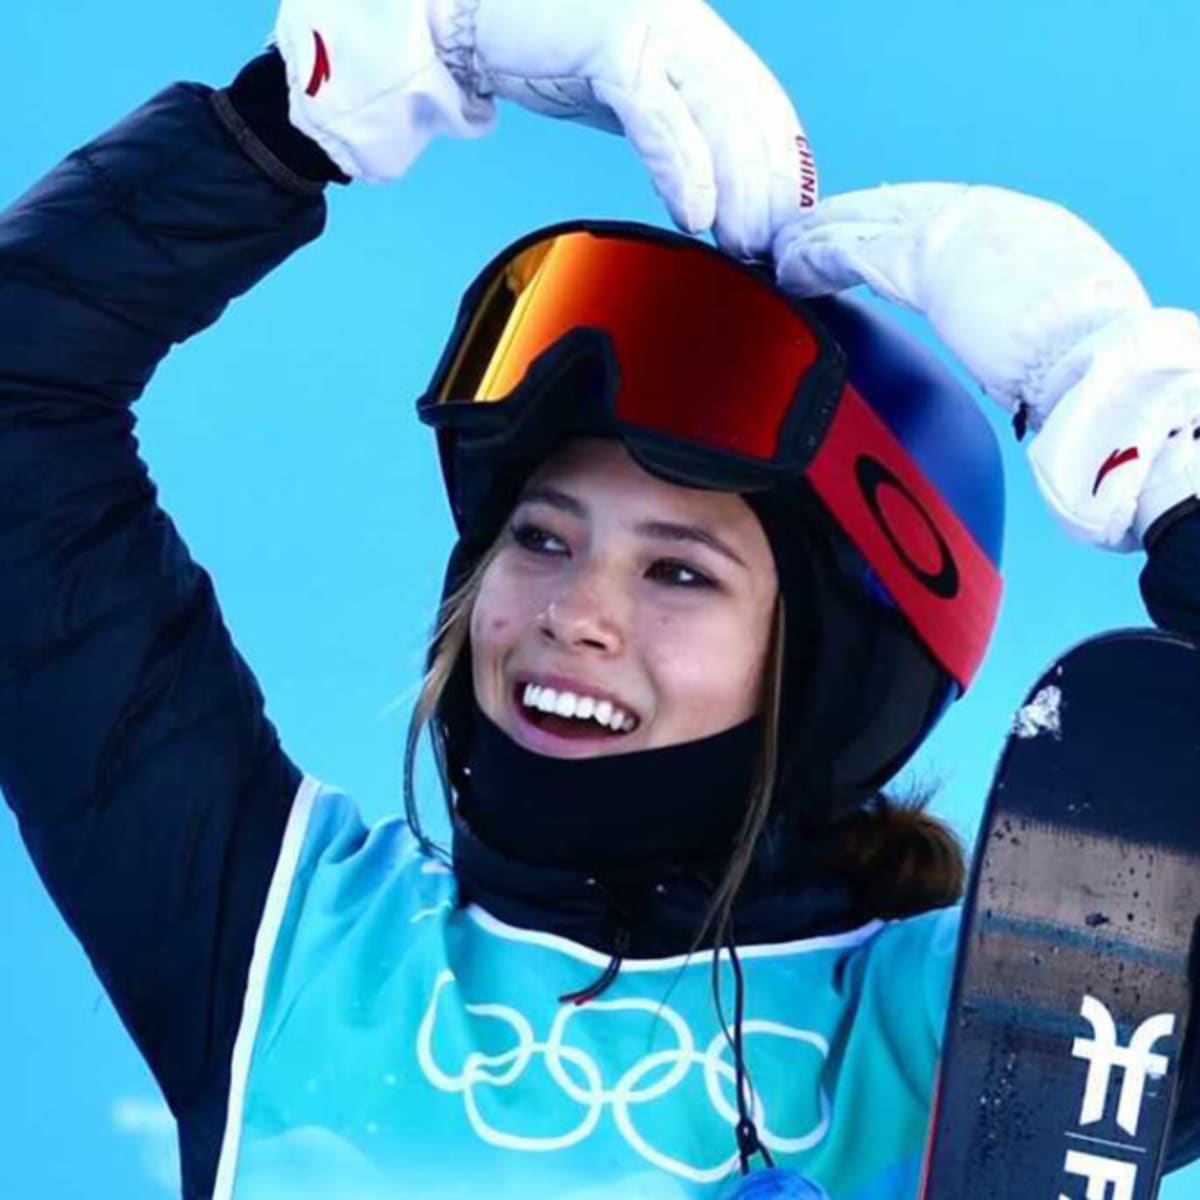 U.S.-born skier Eileen Gu receiving dozens of endorsements after decision  to compete for China at Olympics - The Globe and Mail